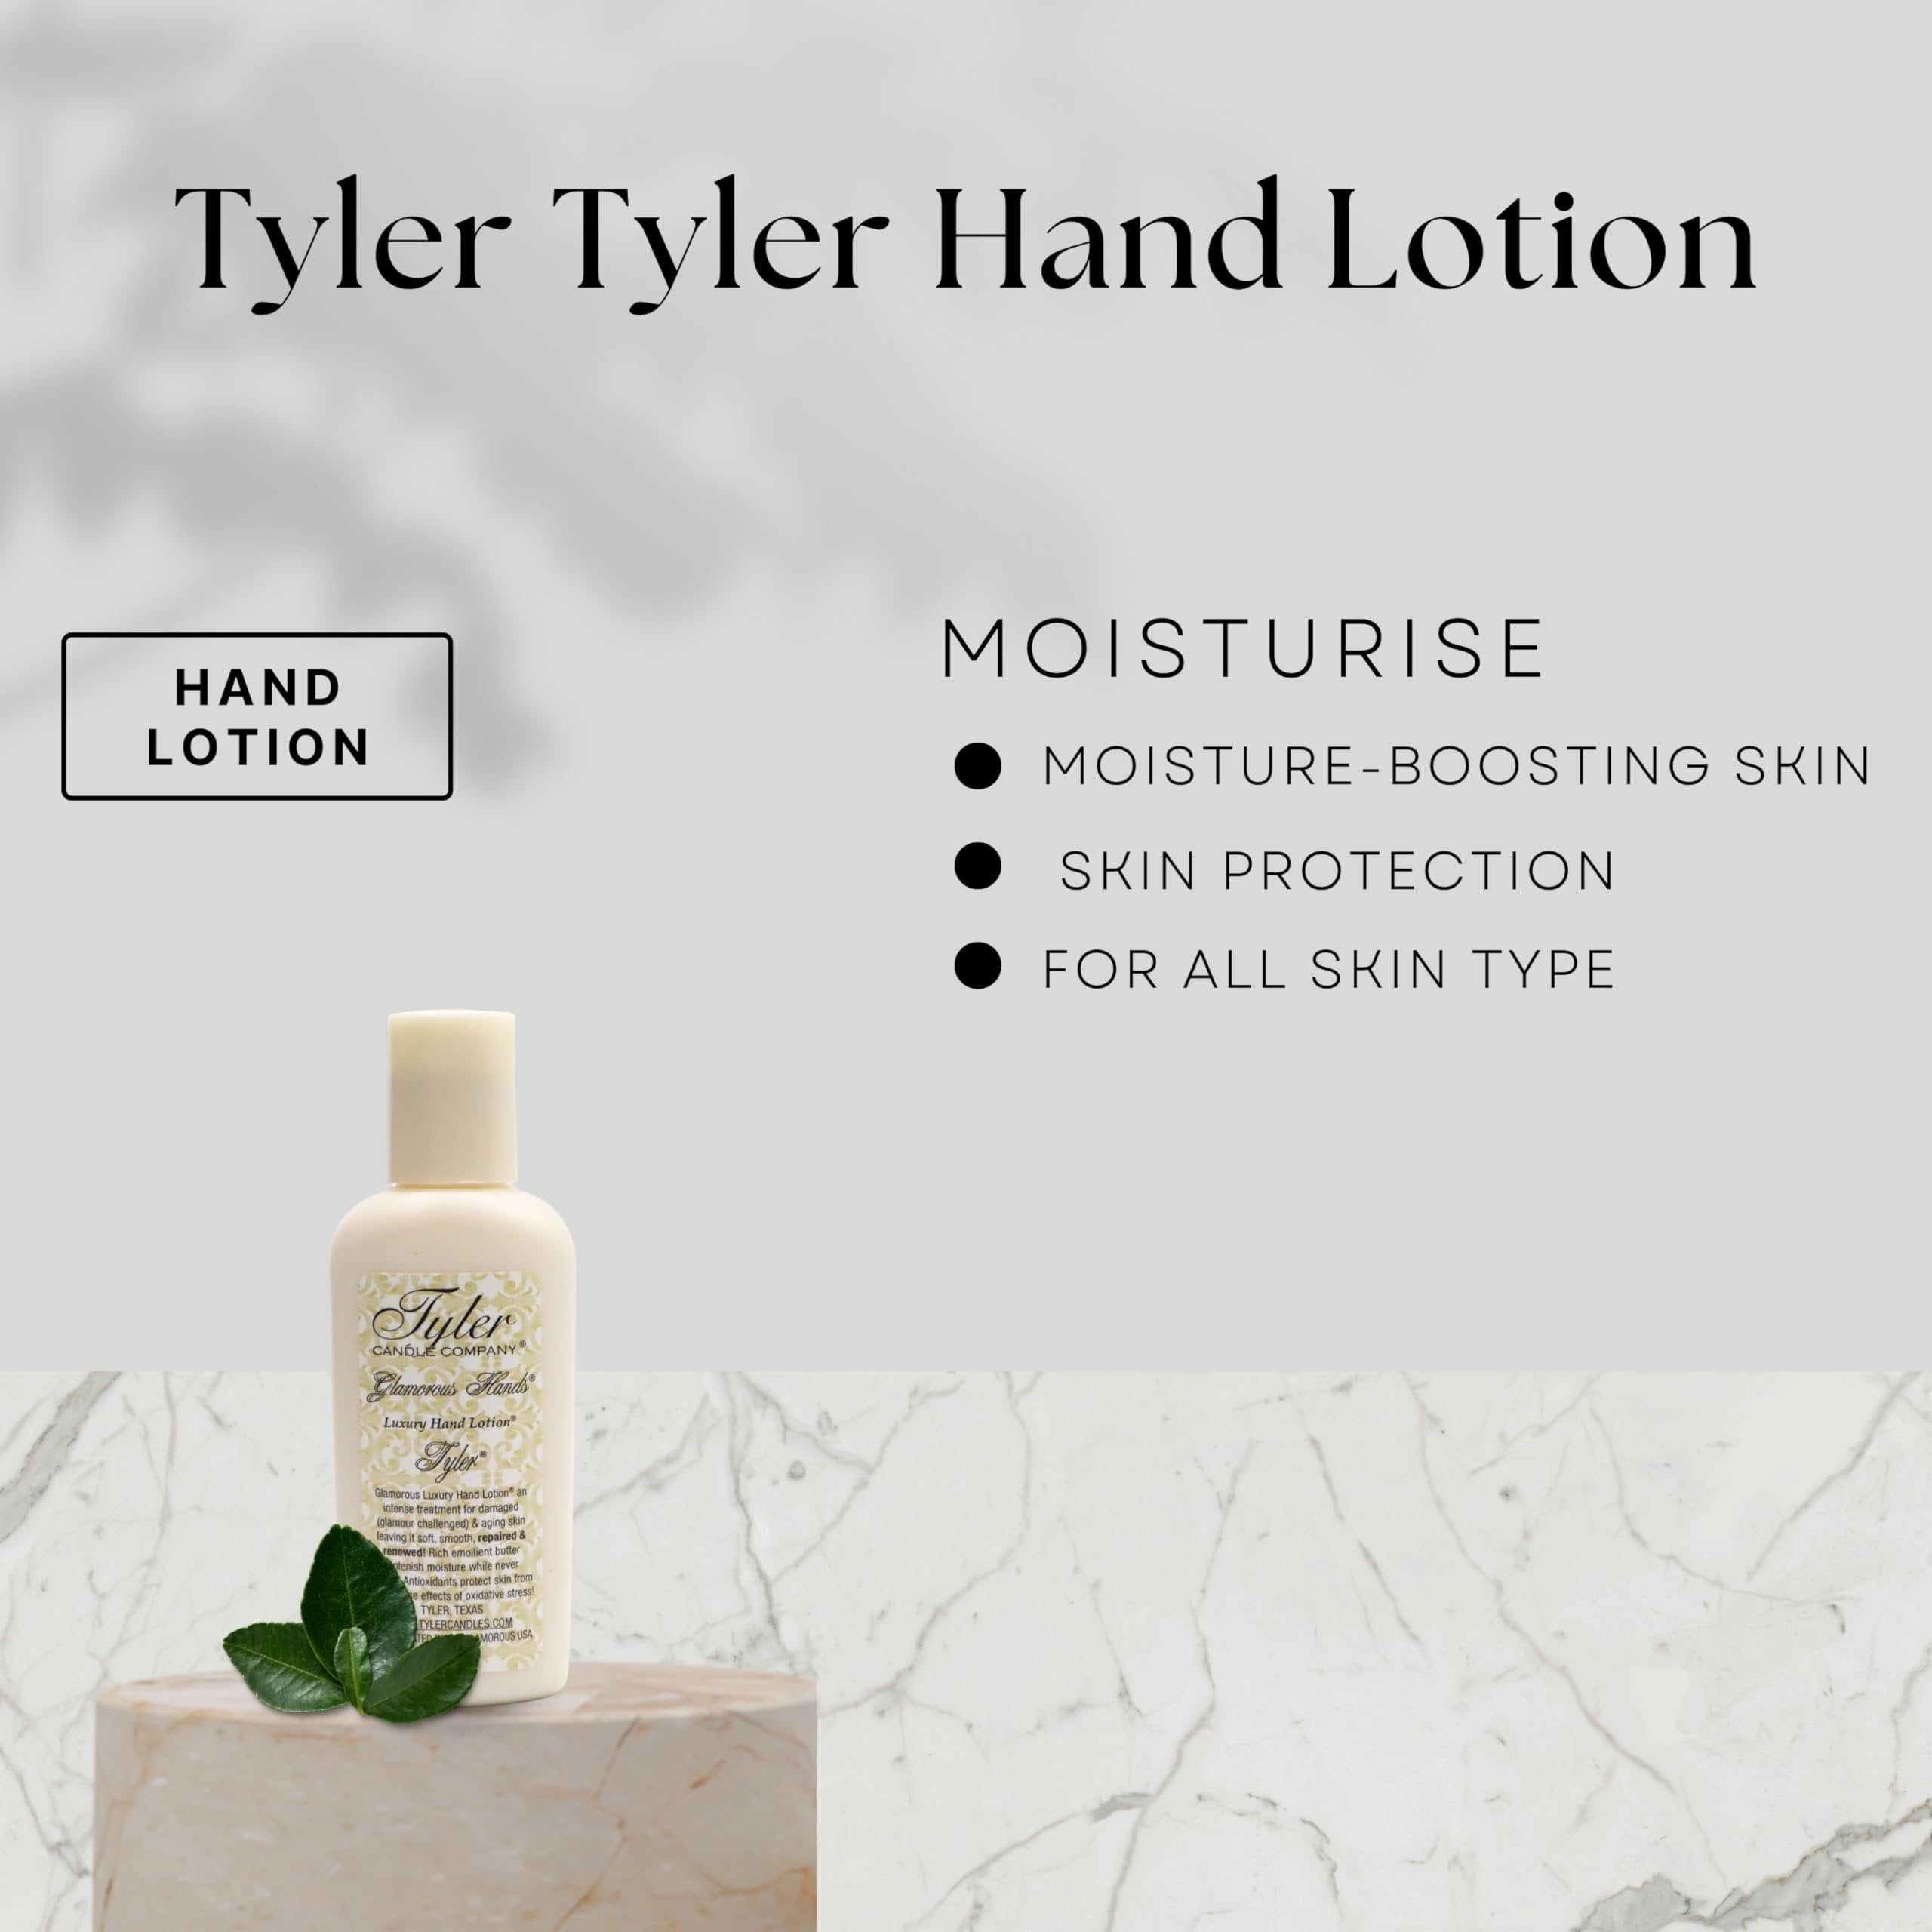 Tyler Hand Lotion - Tyler Scented and Small Hand Cream For Dry Hands with Moisture-Boosting Skin - 2 Oz Travel Size Luxury Hand Lotion and Multi-Purpose Key Chain